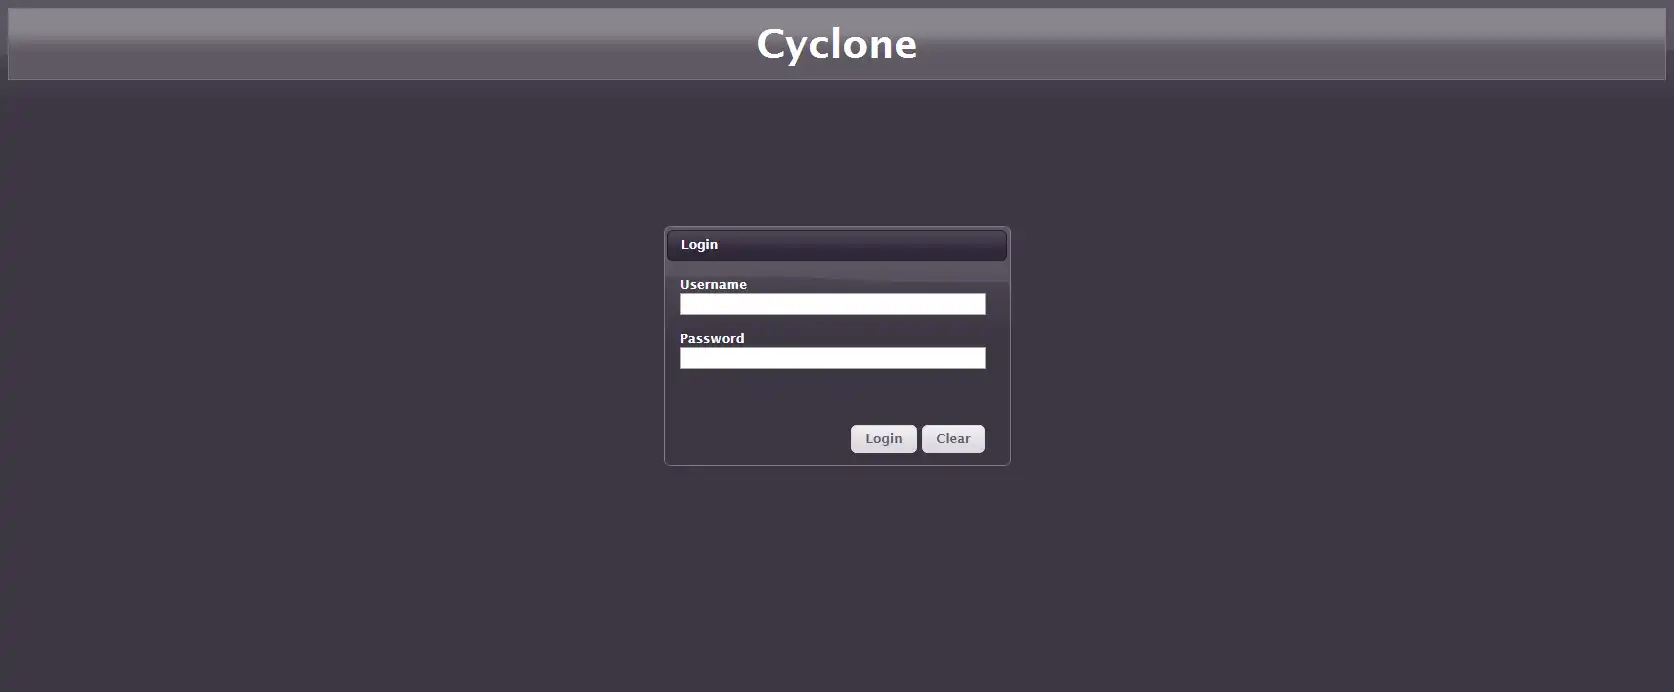 Download web tool or web app Cyclone - Task Automation